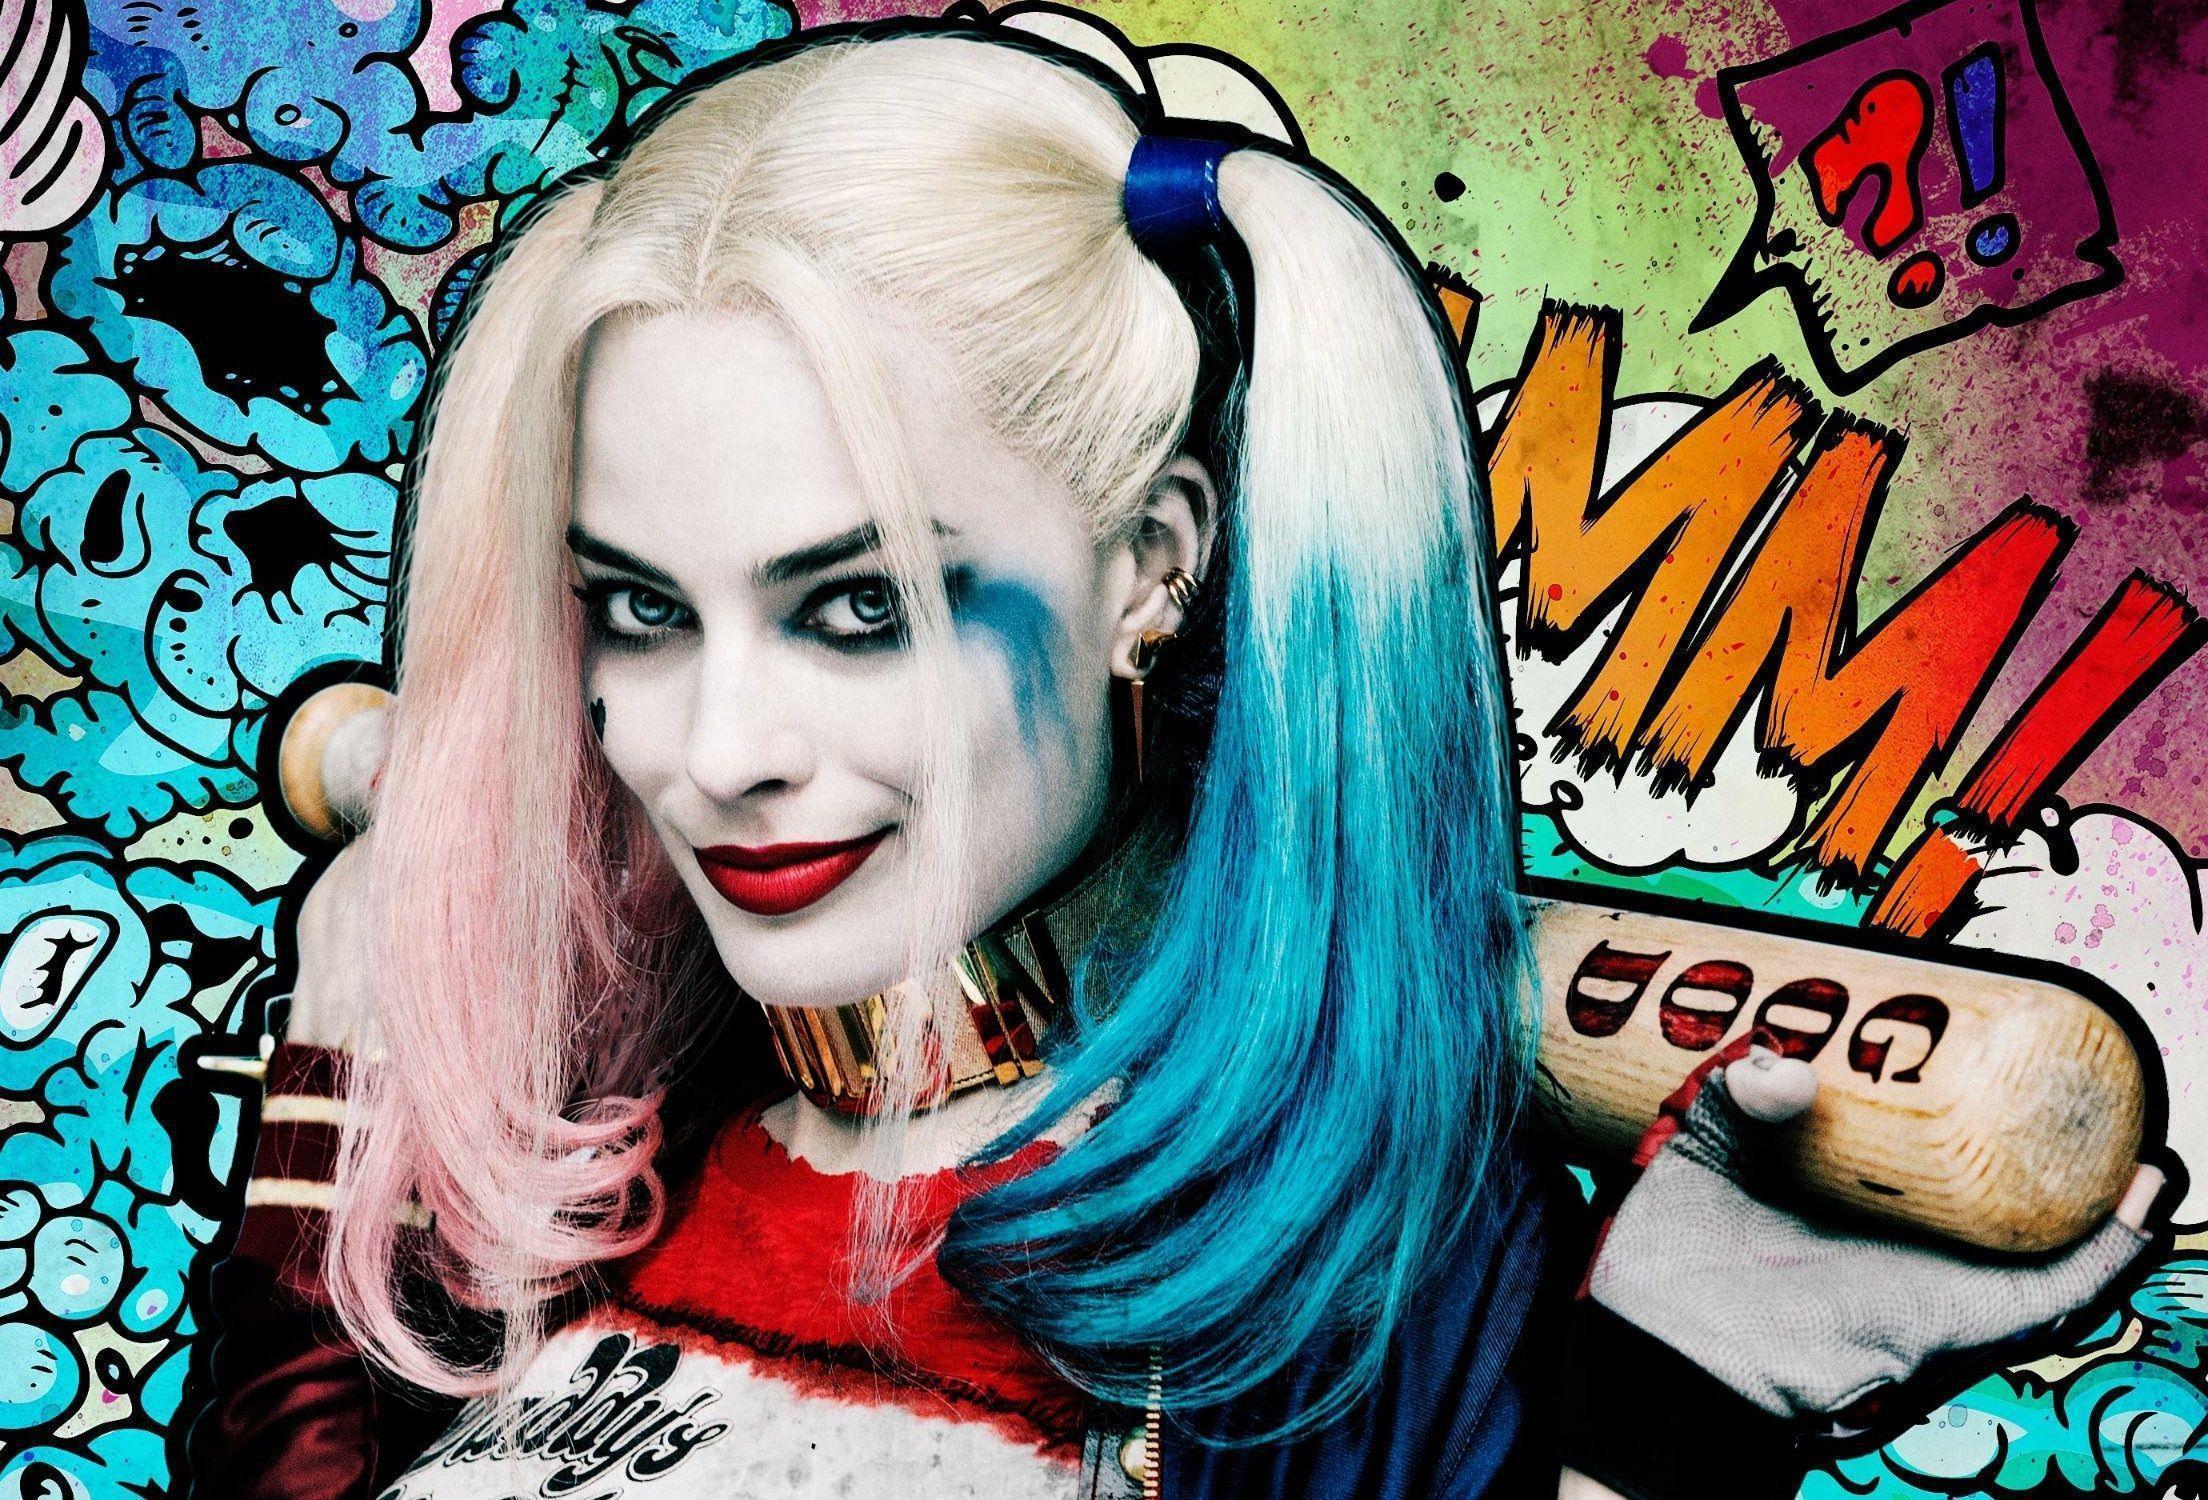 harley quinn suicide squad wallpapers wallpaper cave harley quinn suicide squad wallpapers